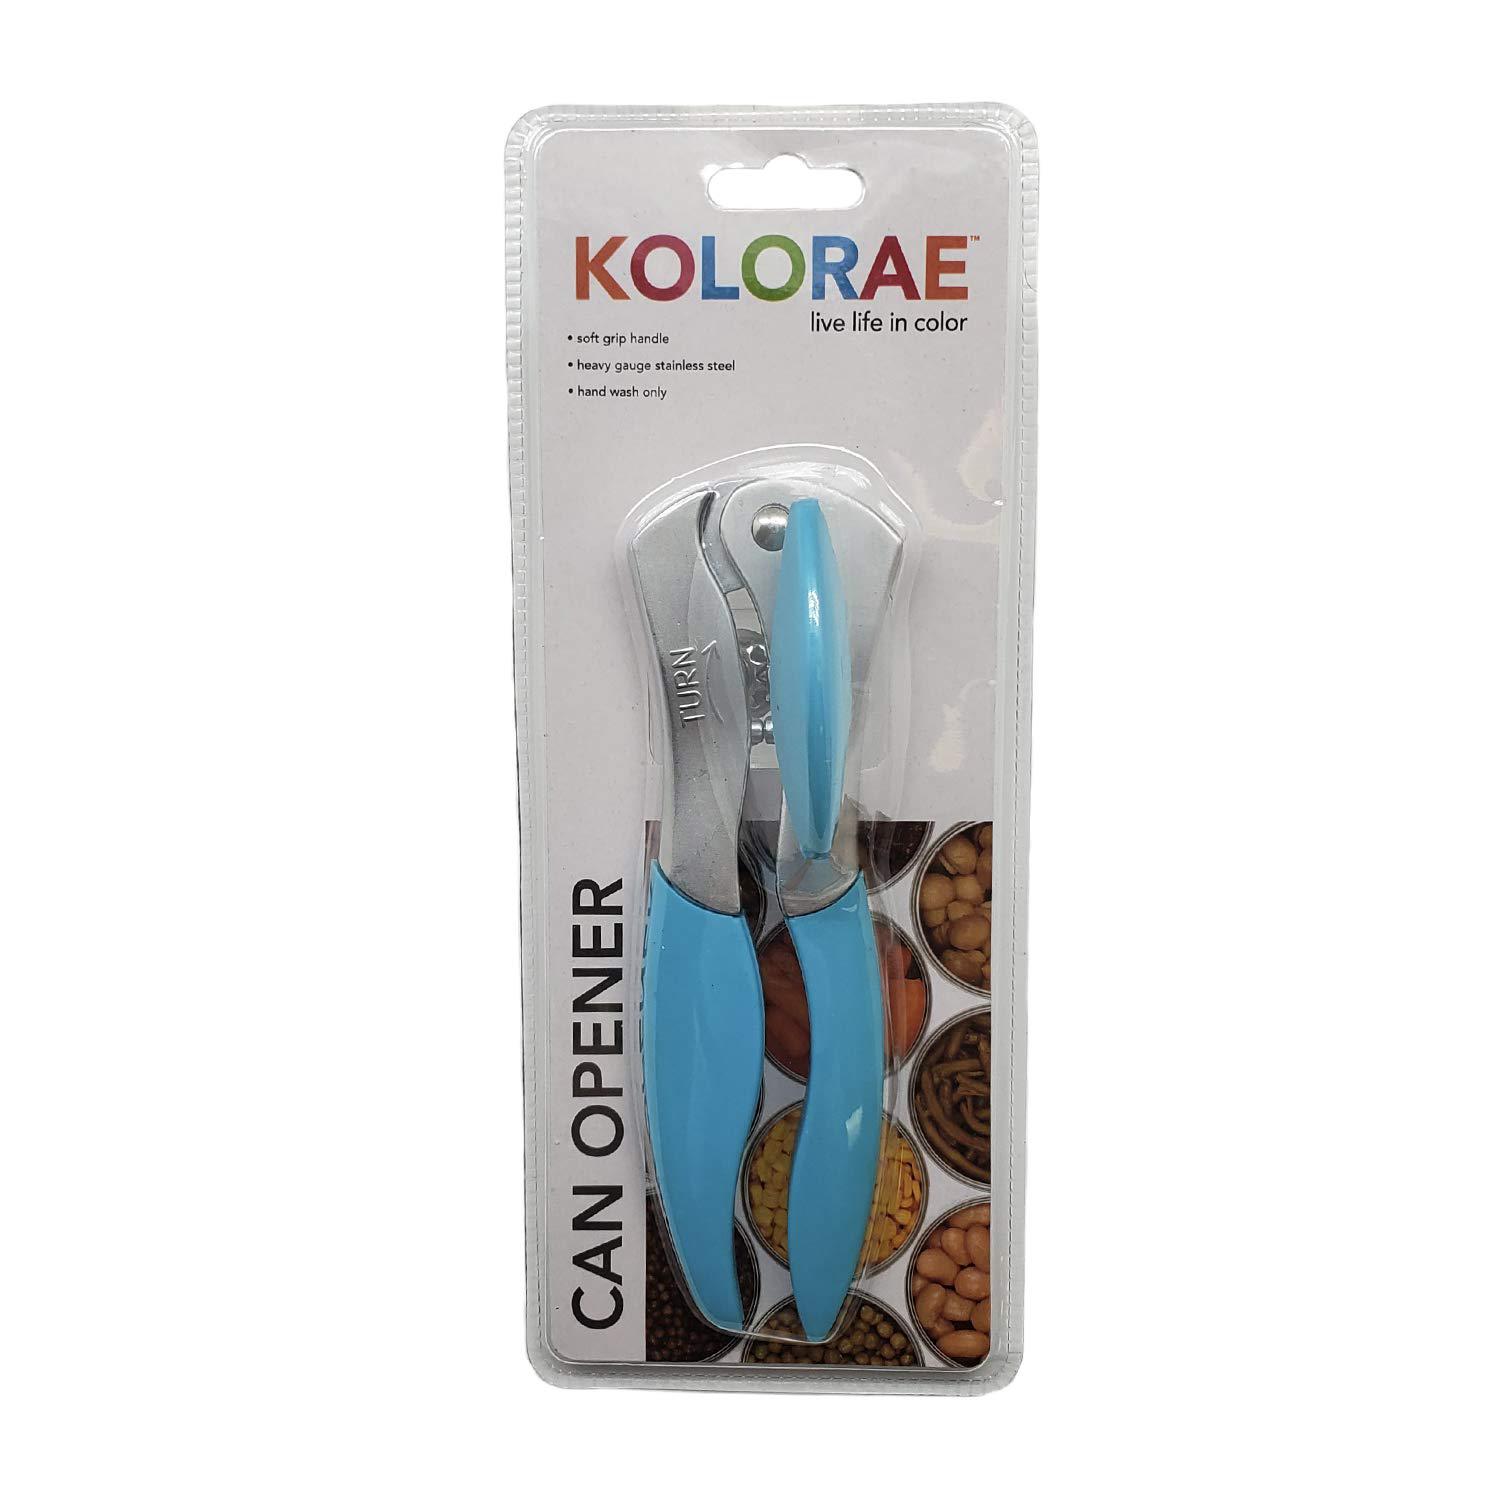 Kolorae (3 count) kolorae soft grip can opener- heavy duty, reliable can opener with rubber grip handles and stainless steel edge- 1 